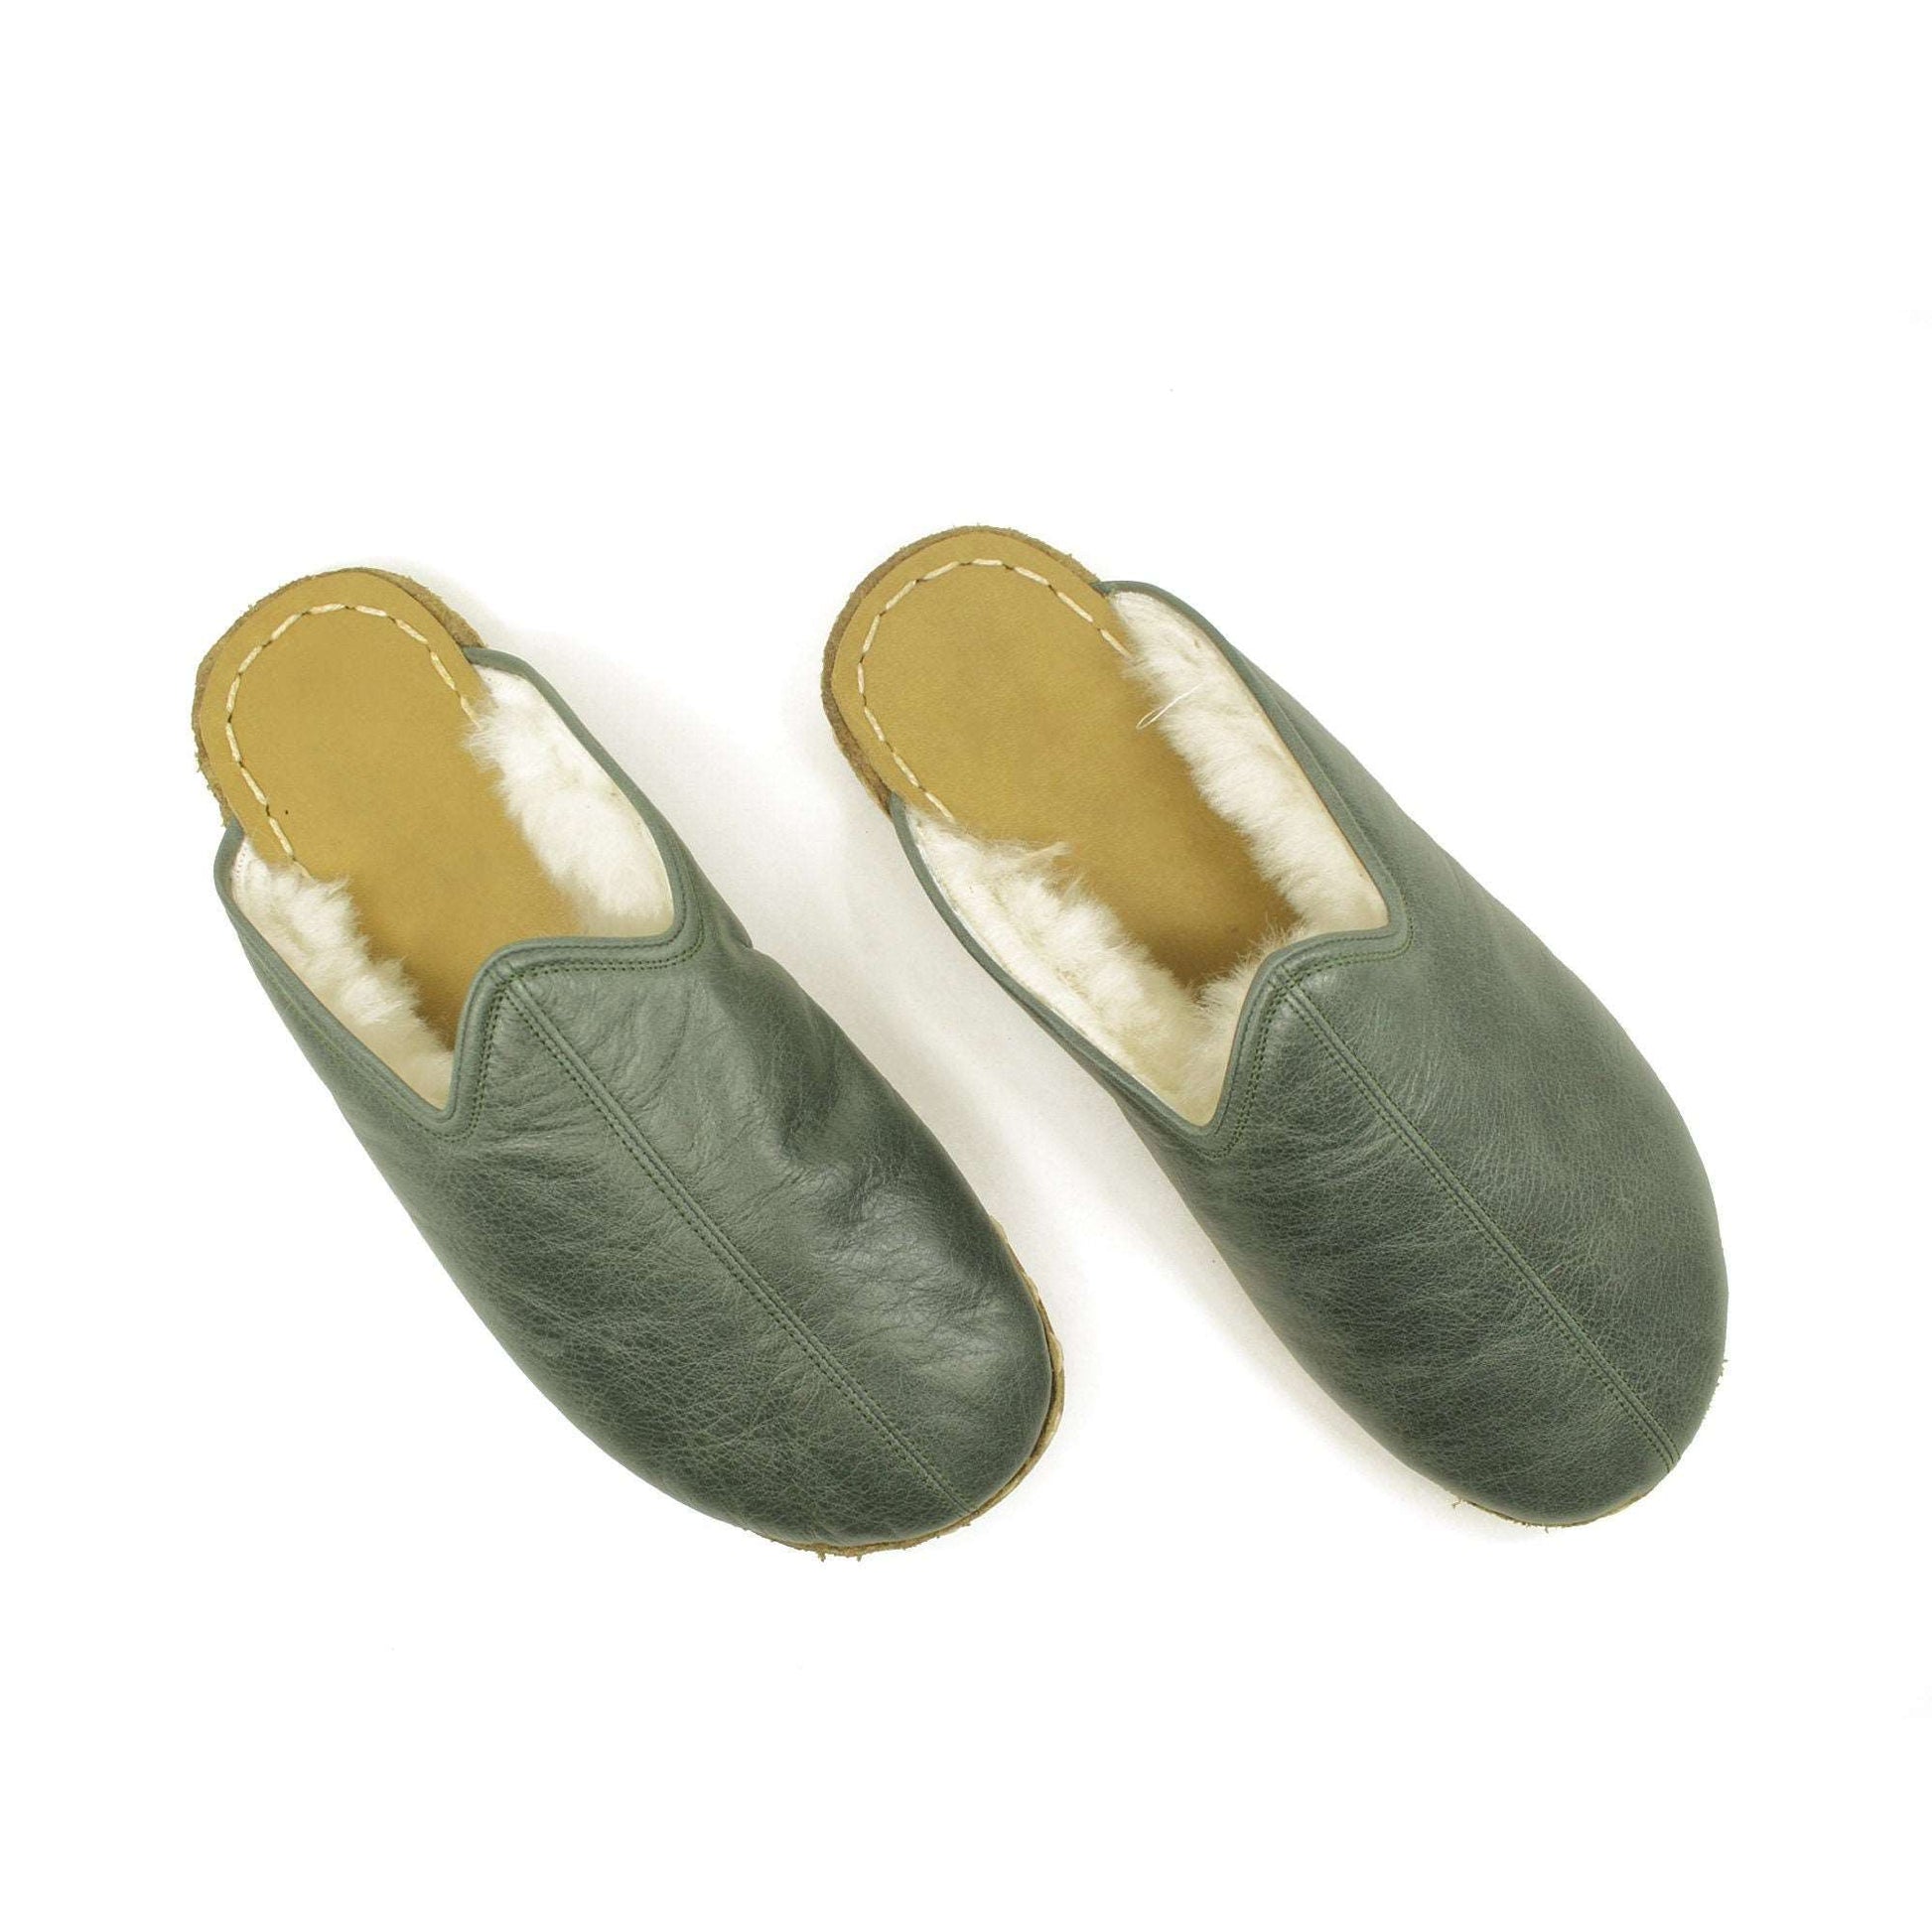 Fur Barefoot Indoor Slippers Leather Handmade For Woman